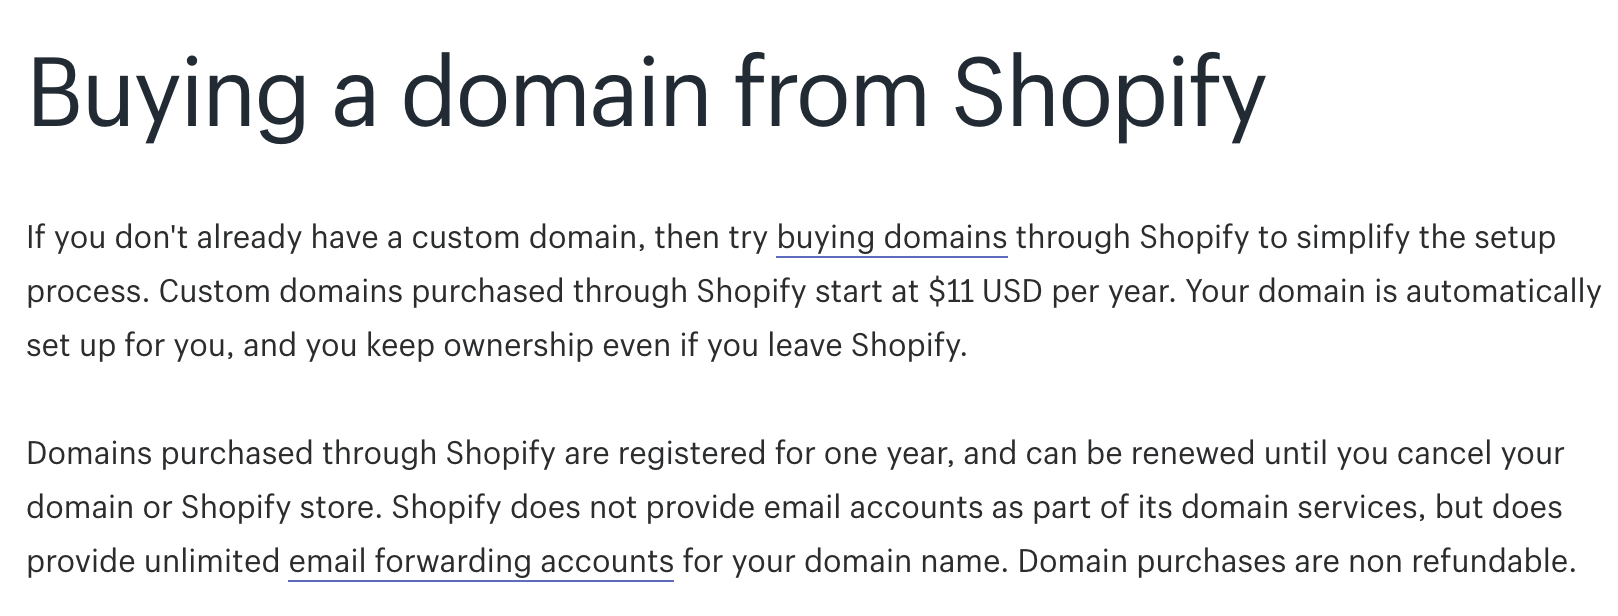 buying a domain from shopify